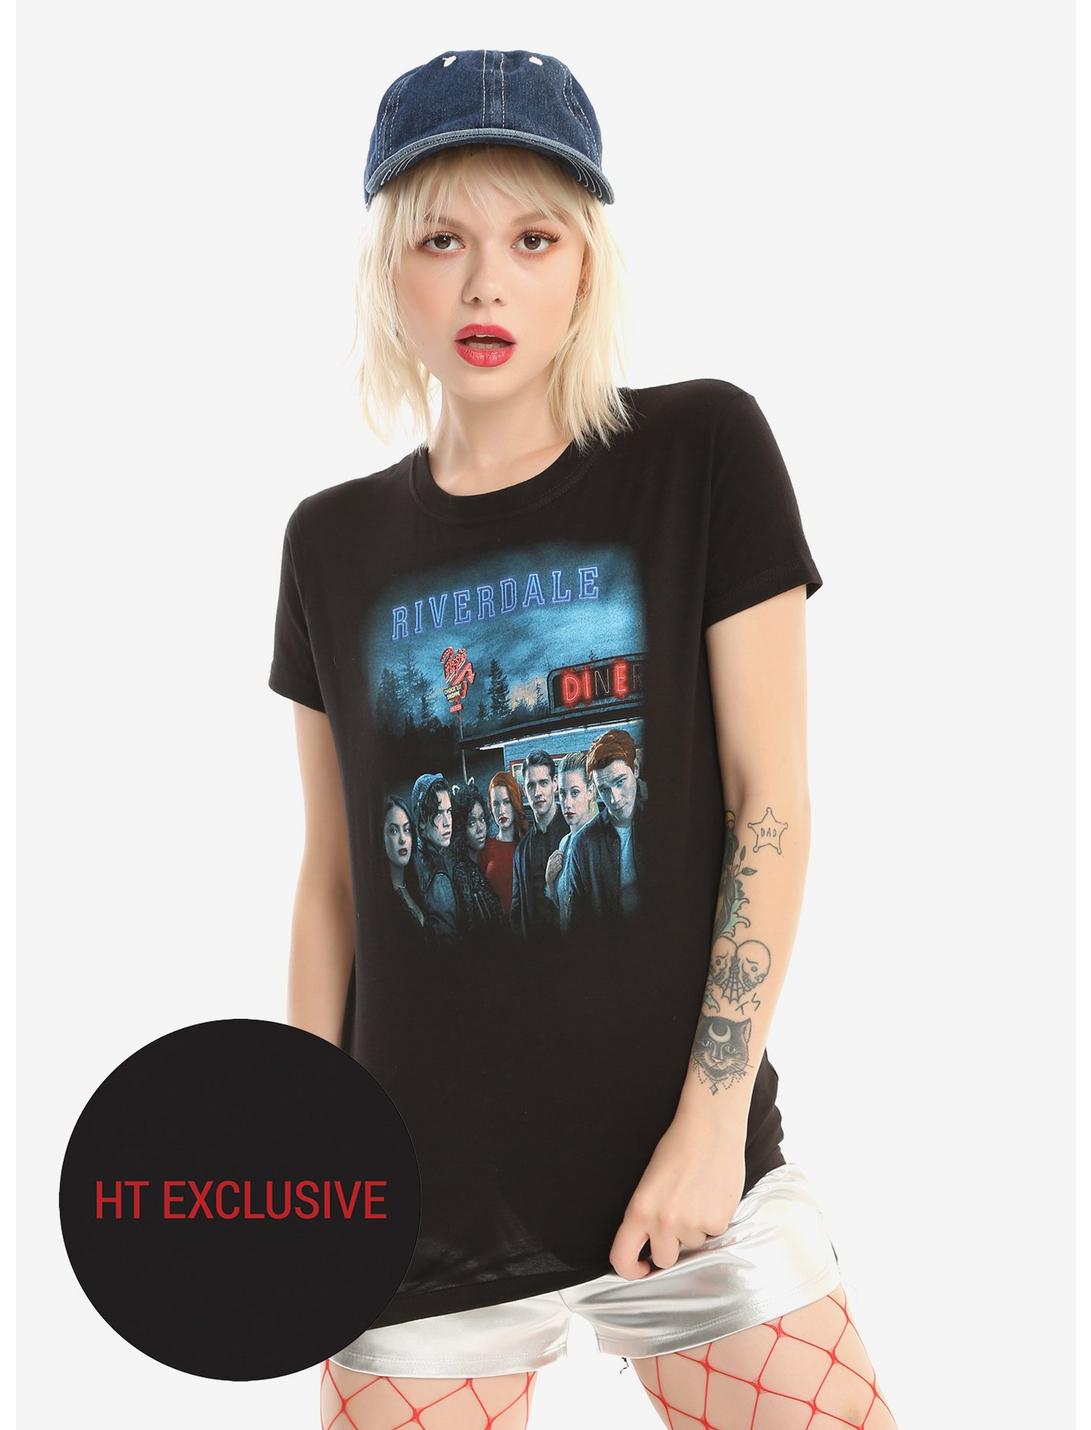 Riverdale Group Diner Girls T-Shirt Hot Topic Exclusive, BLACK, hi-res